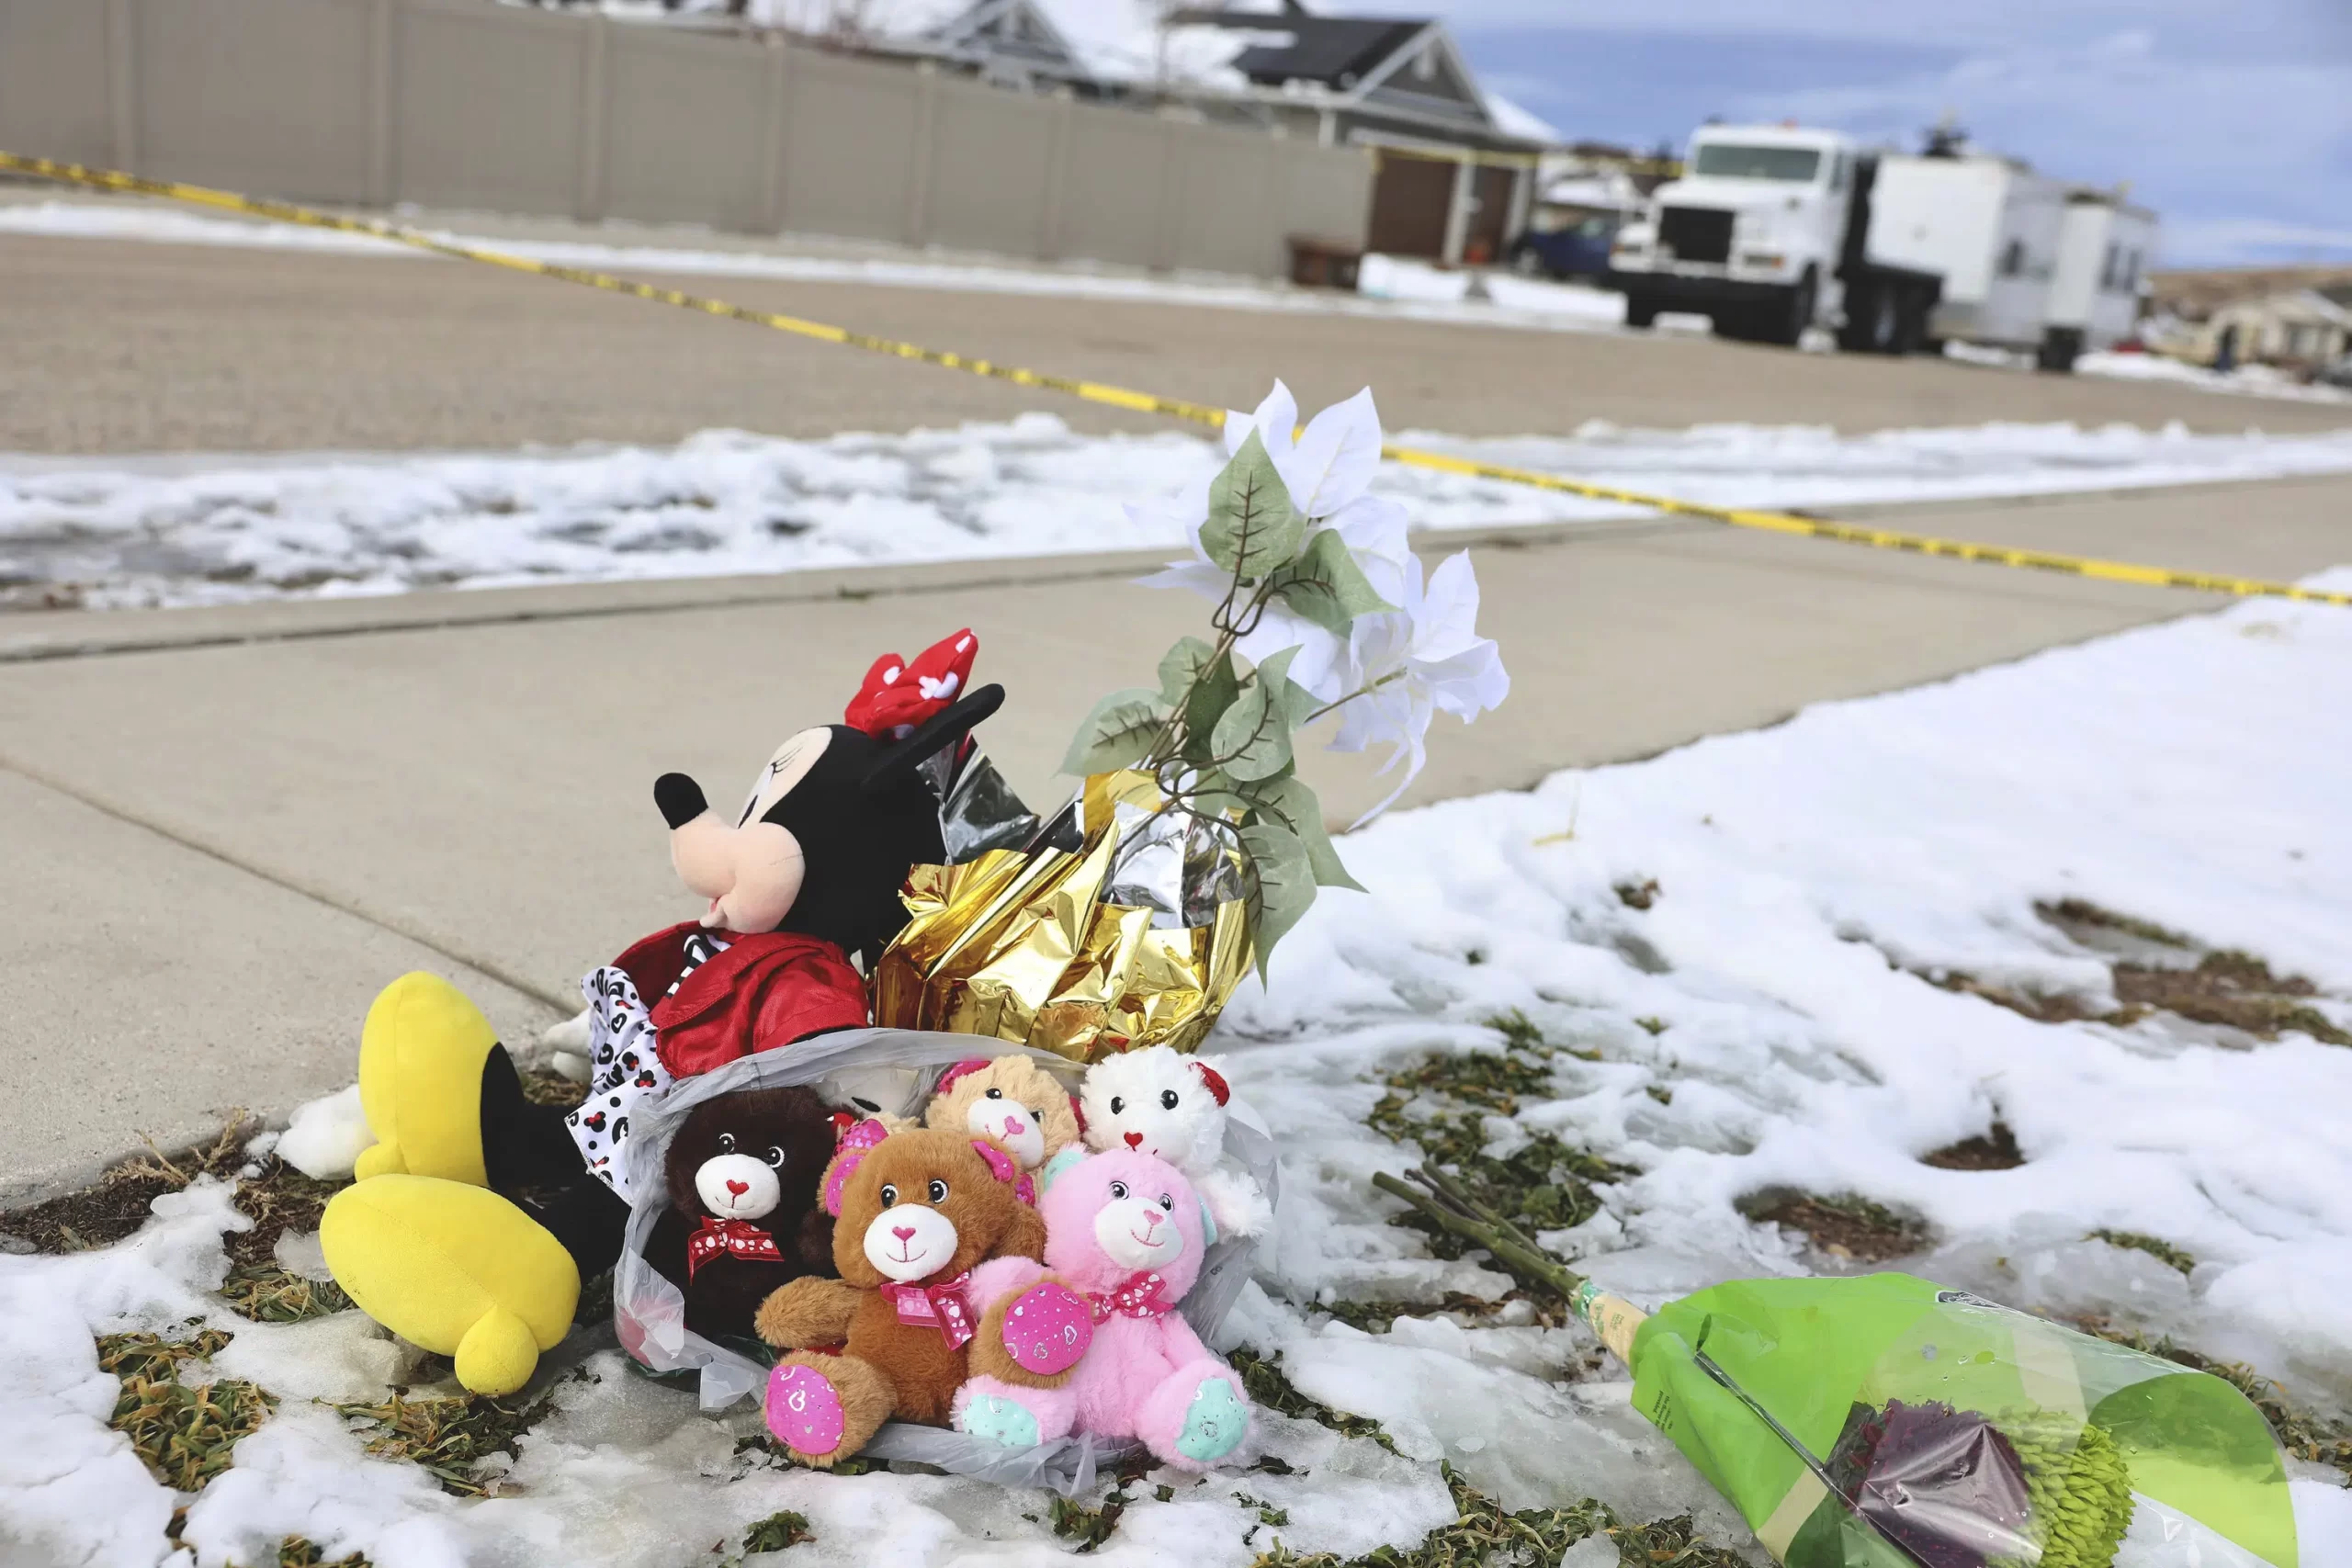 Police believe father killed his wife, 5 children and mother-in-law in Utah shooting